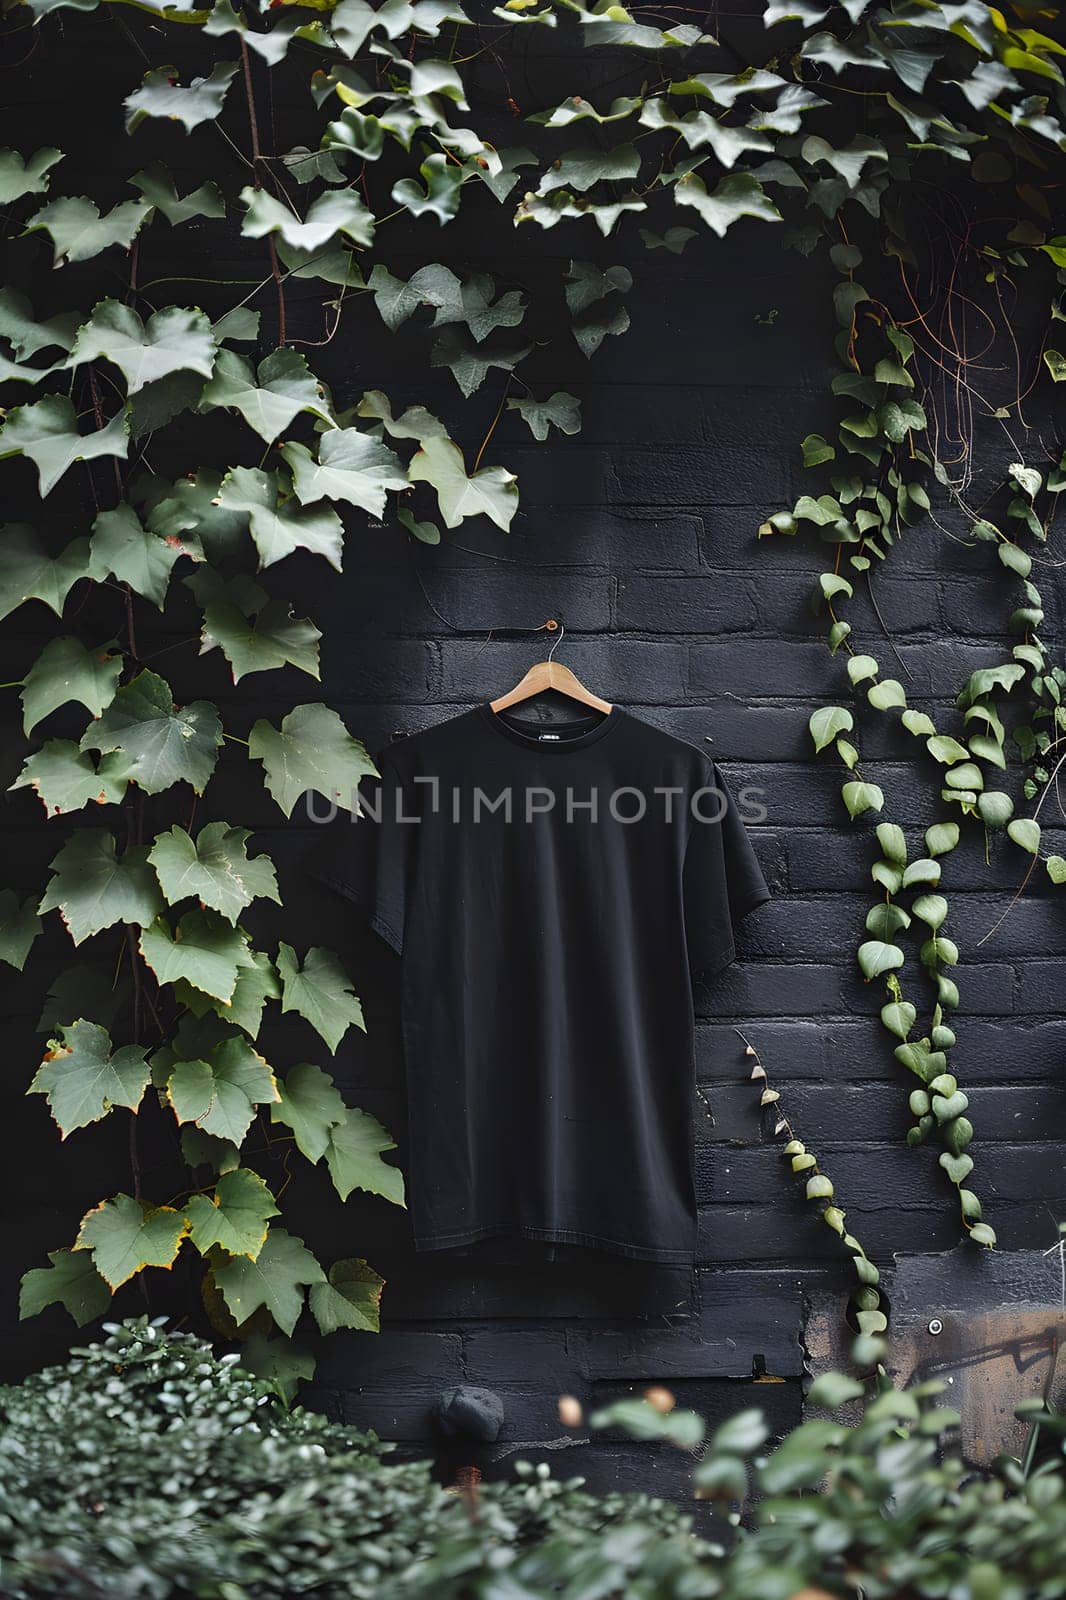 A black tshirt with short sleeves is displayed on a twig hanger against a black wall, creating a minimalist landscape with a touch of nature